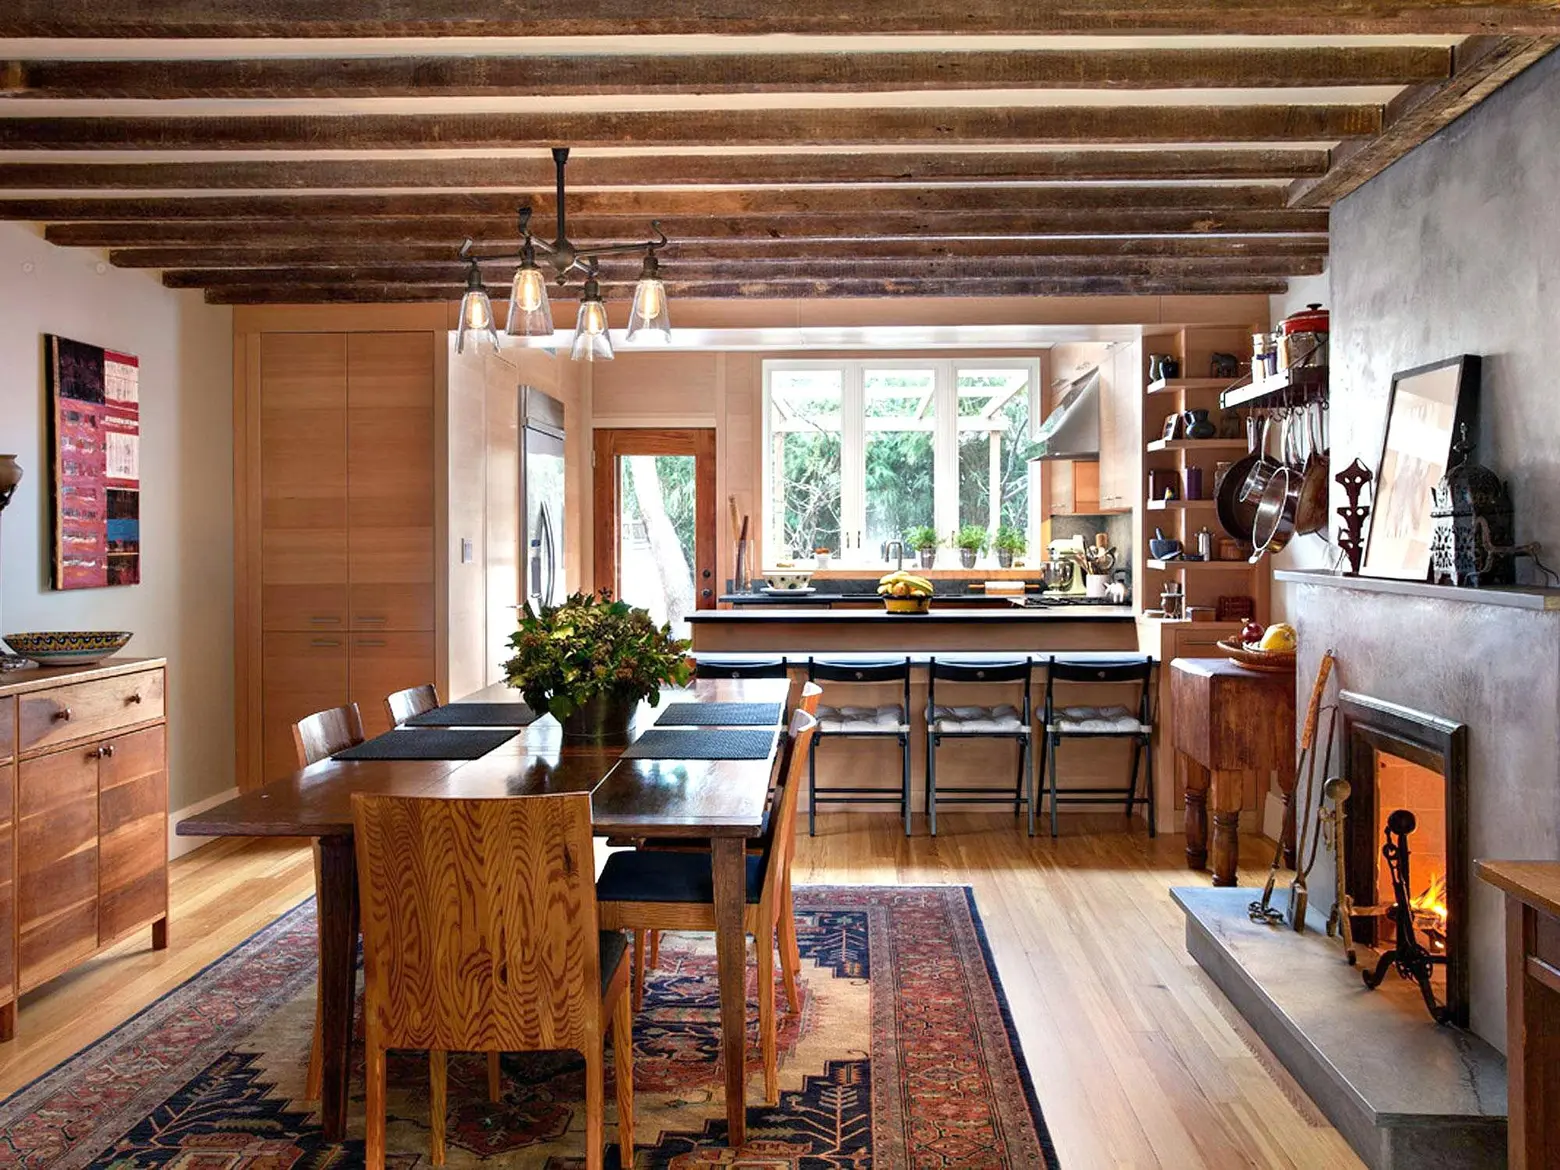 Loci Architecture took this 1878 Carroll Gardens brownstone and decked it out with wood